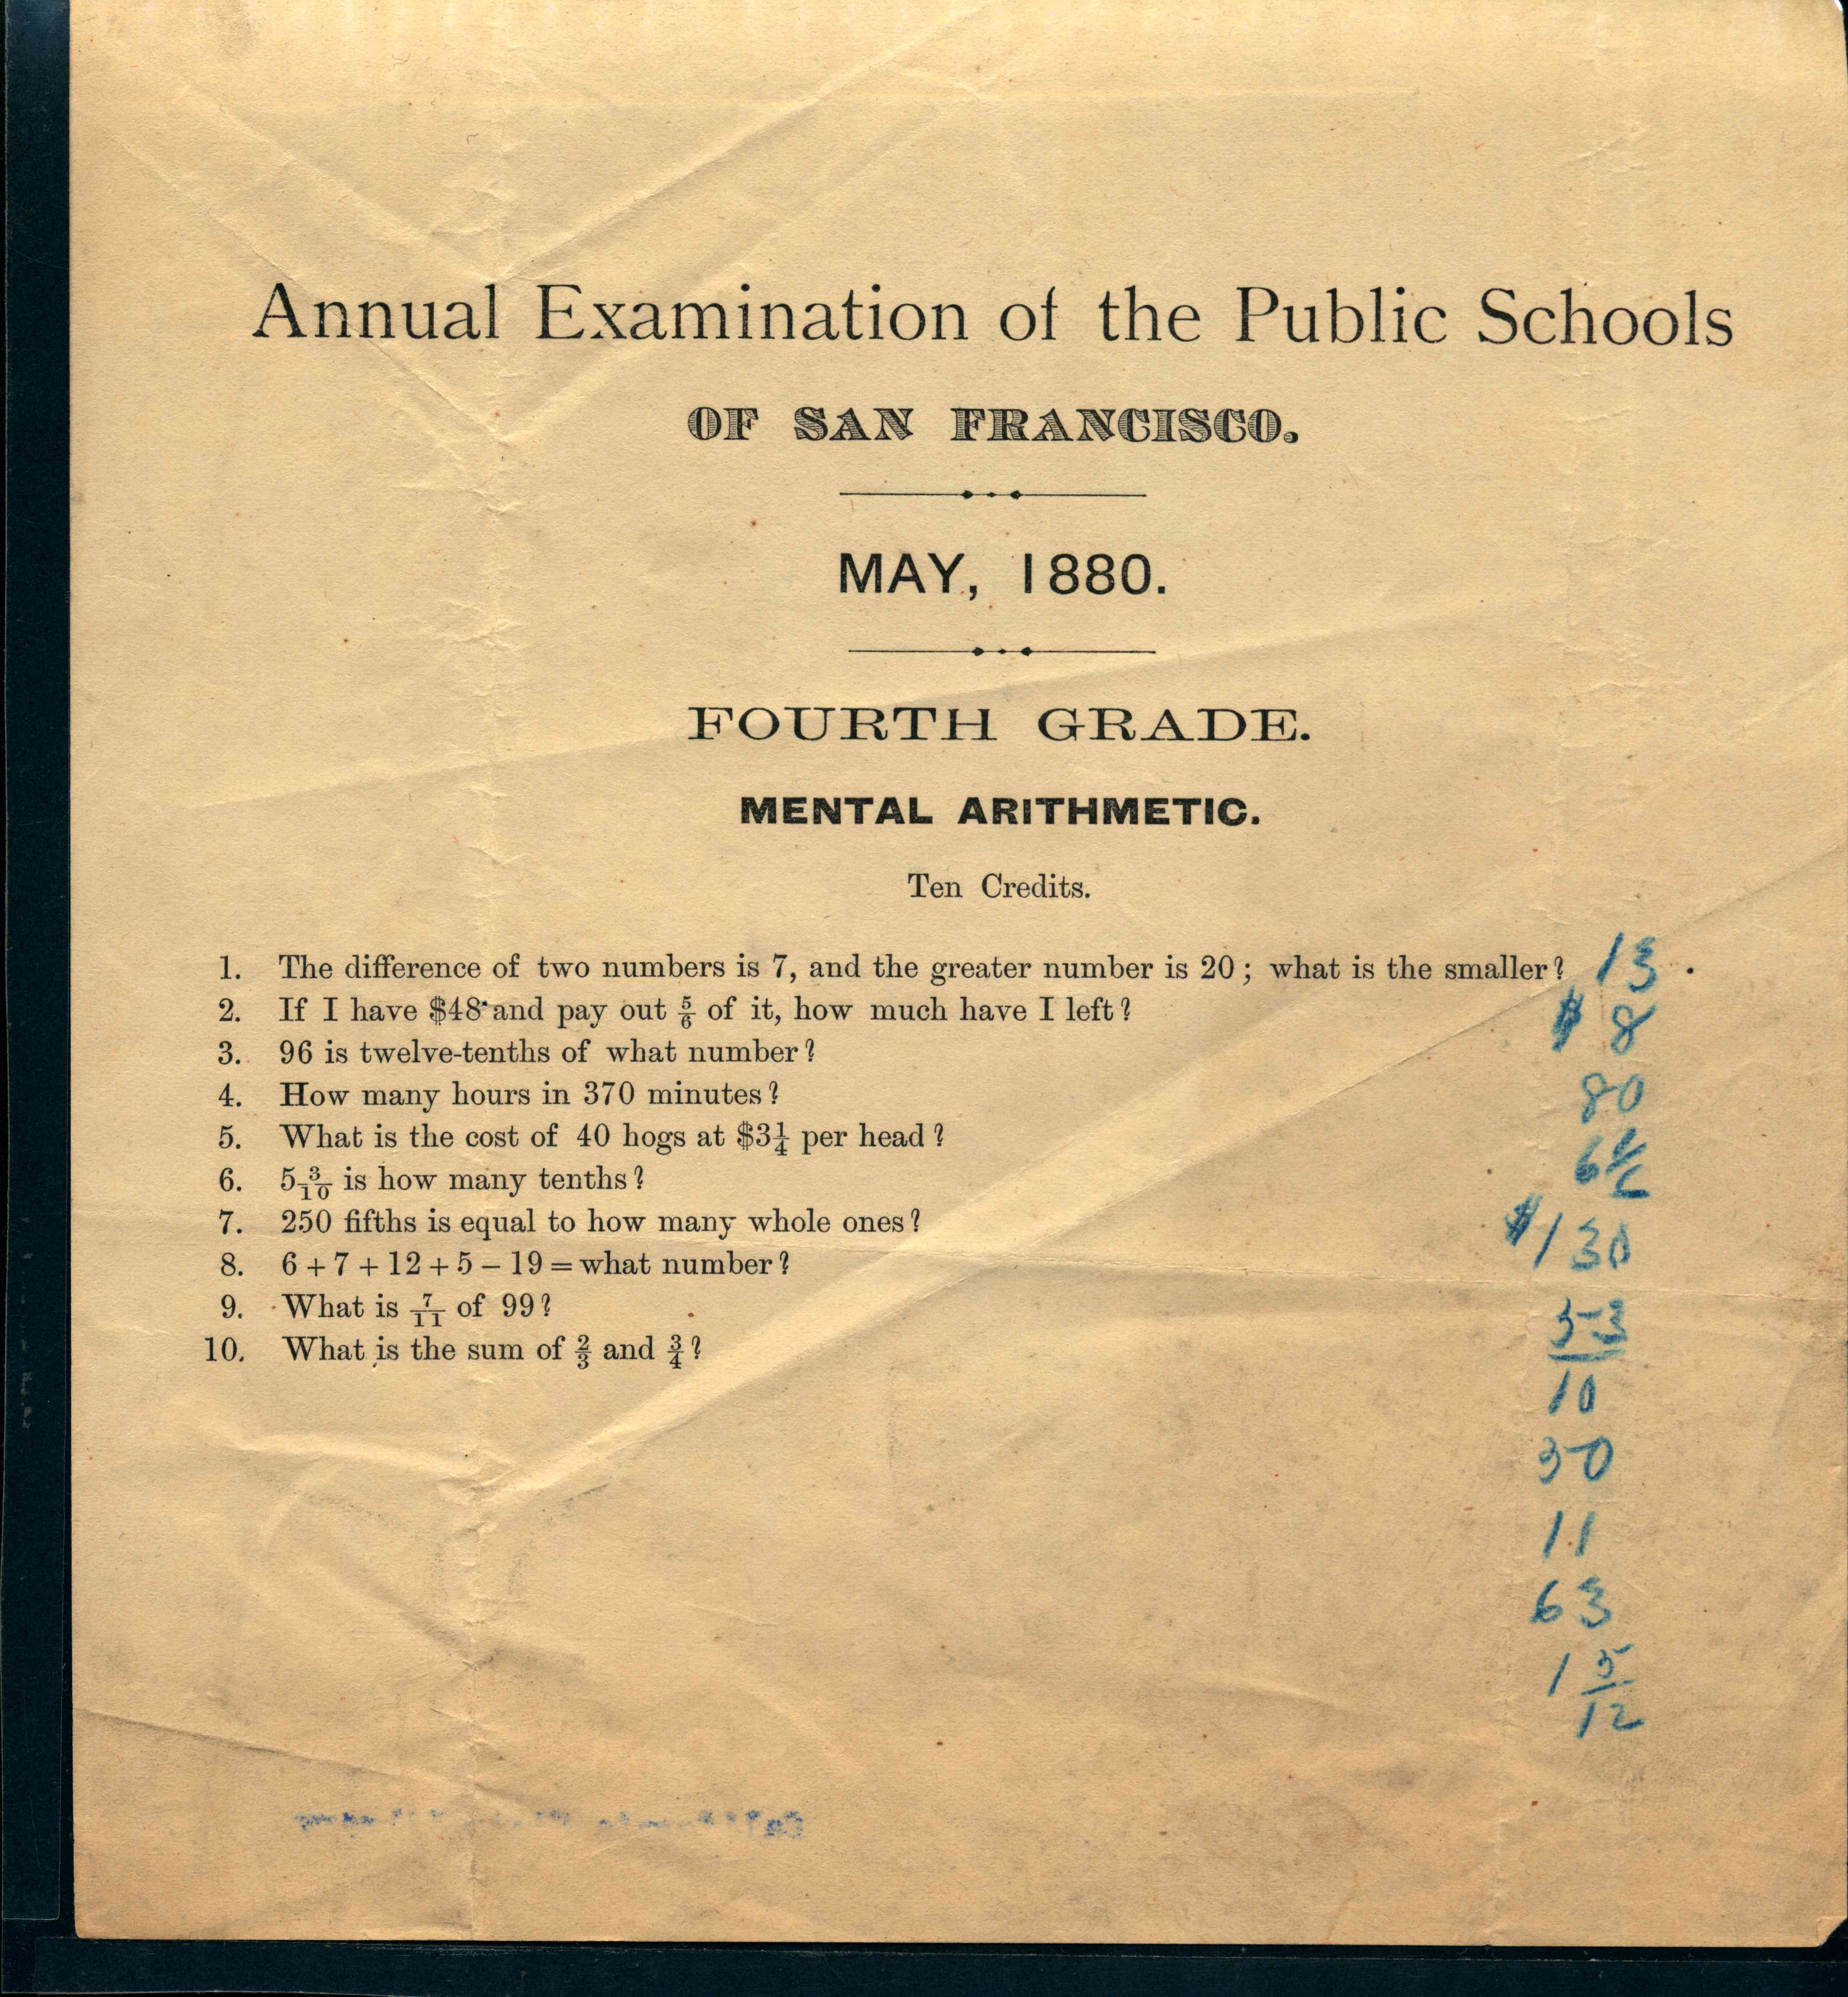 Annual Examination of the Public Schools on top of page